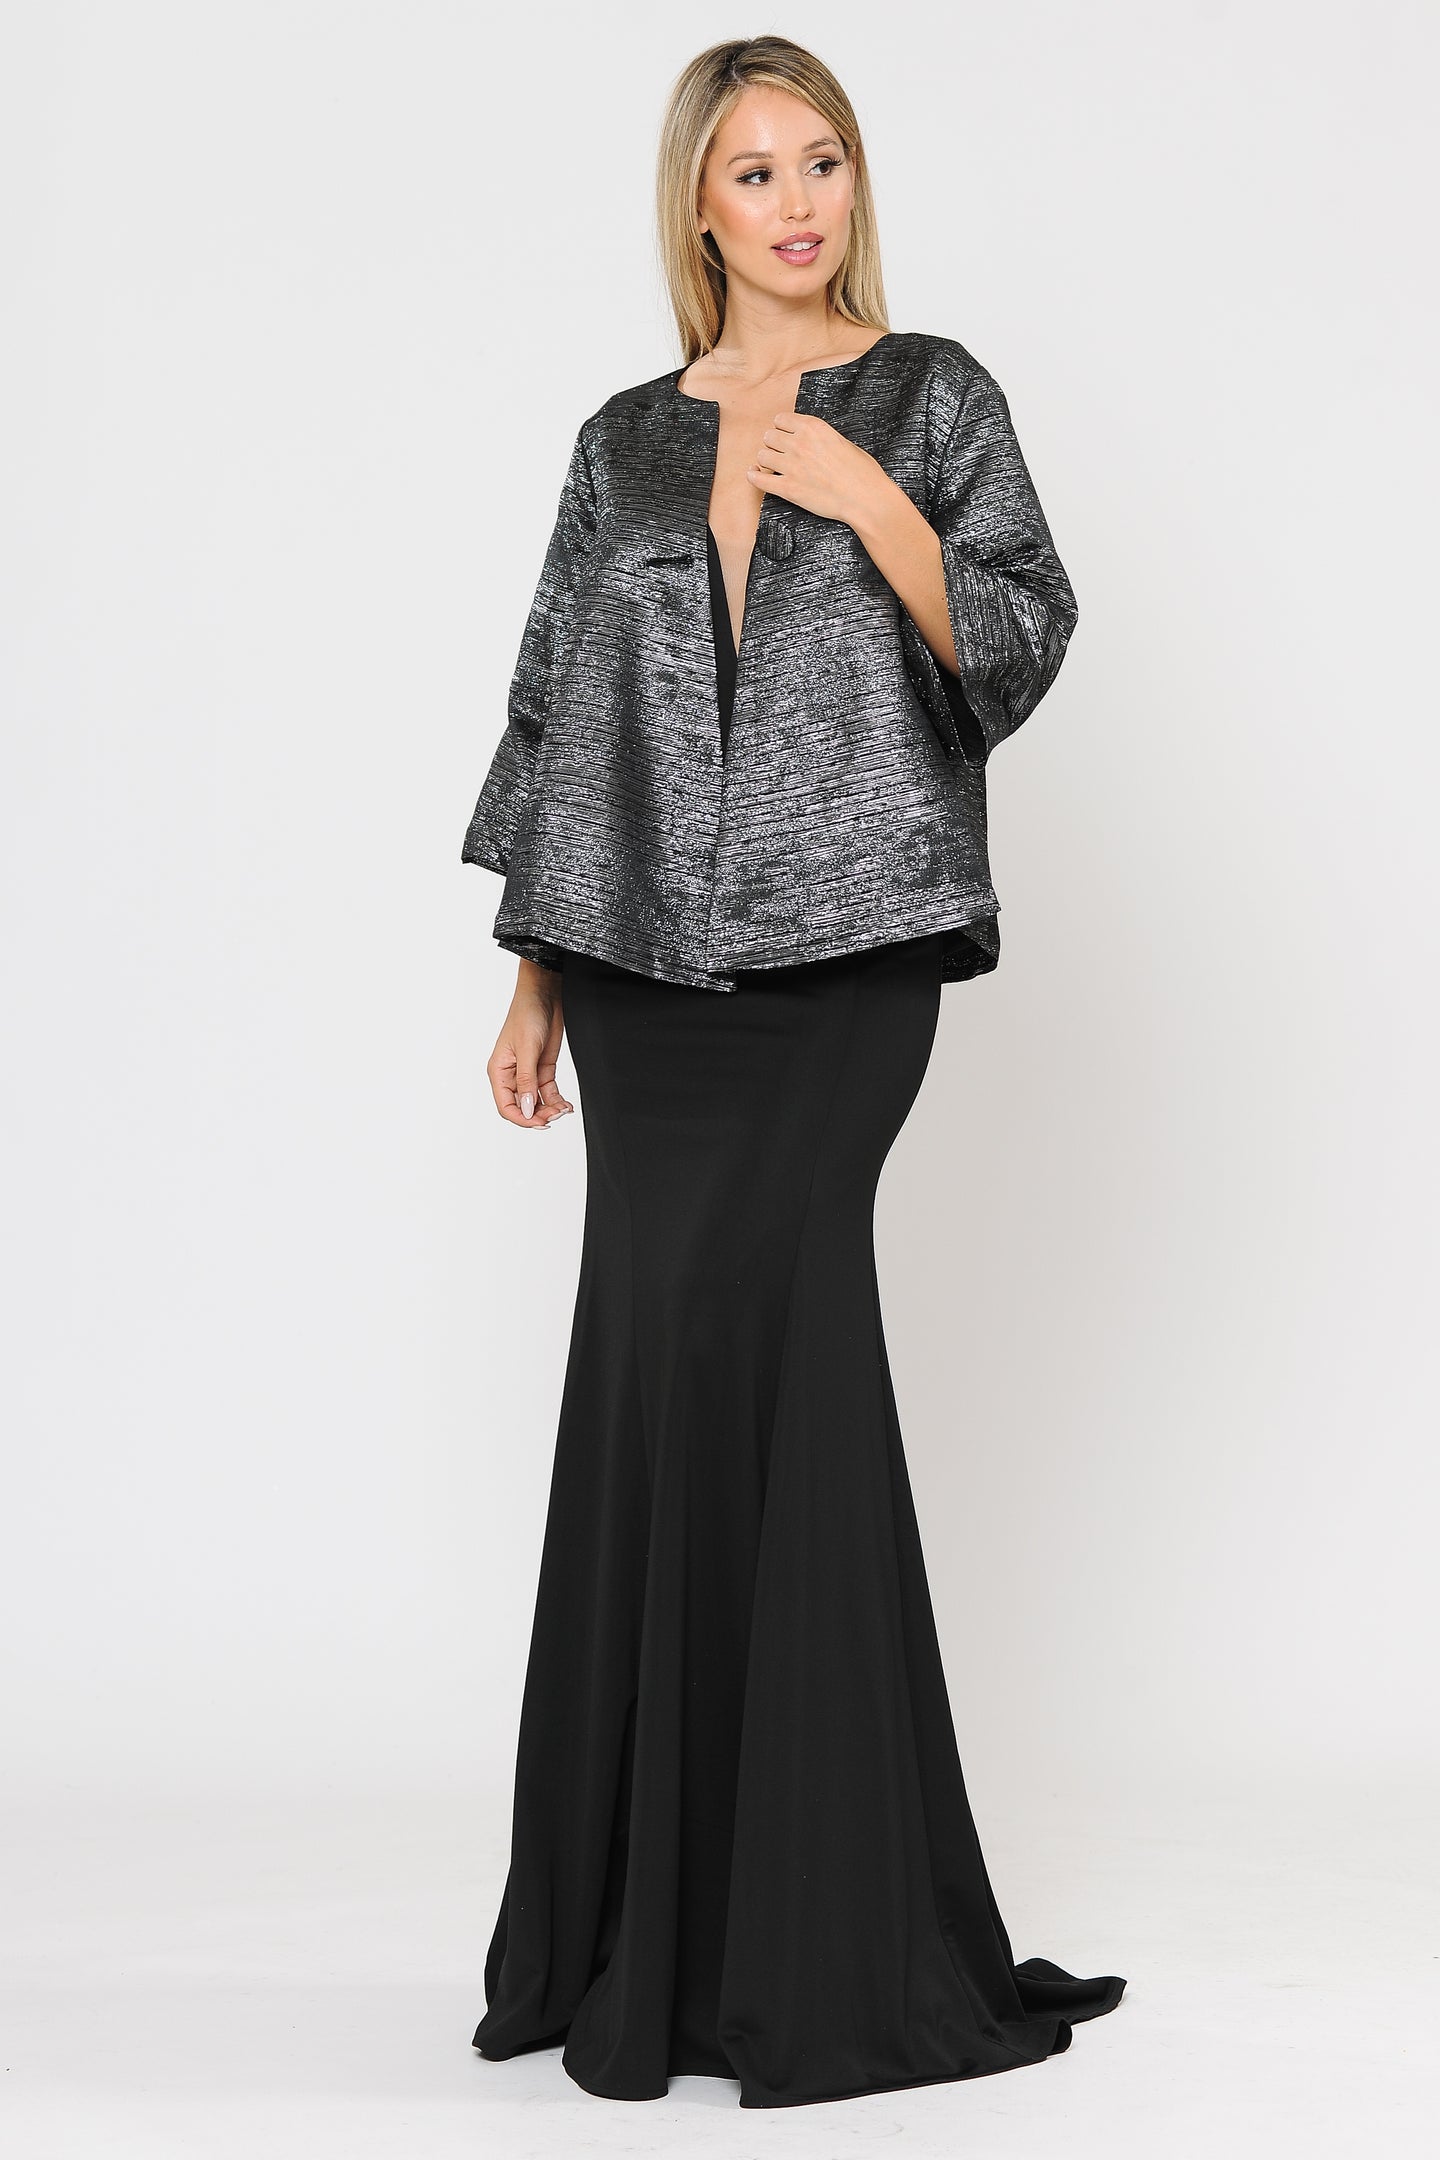 Night Out Open Front Bell Sleeve Jacket - LAYJK1922